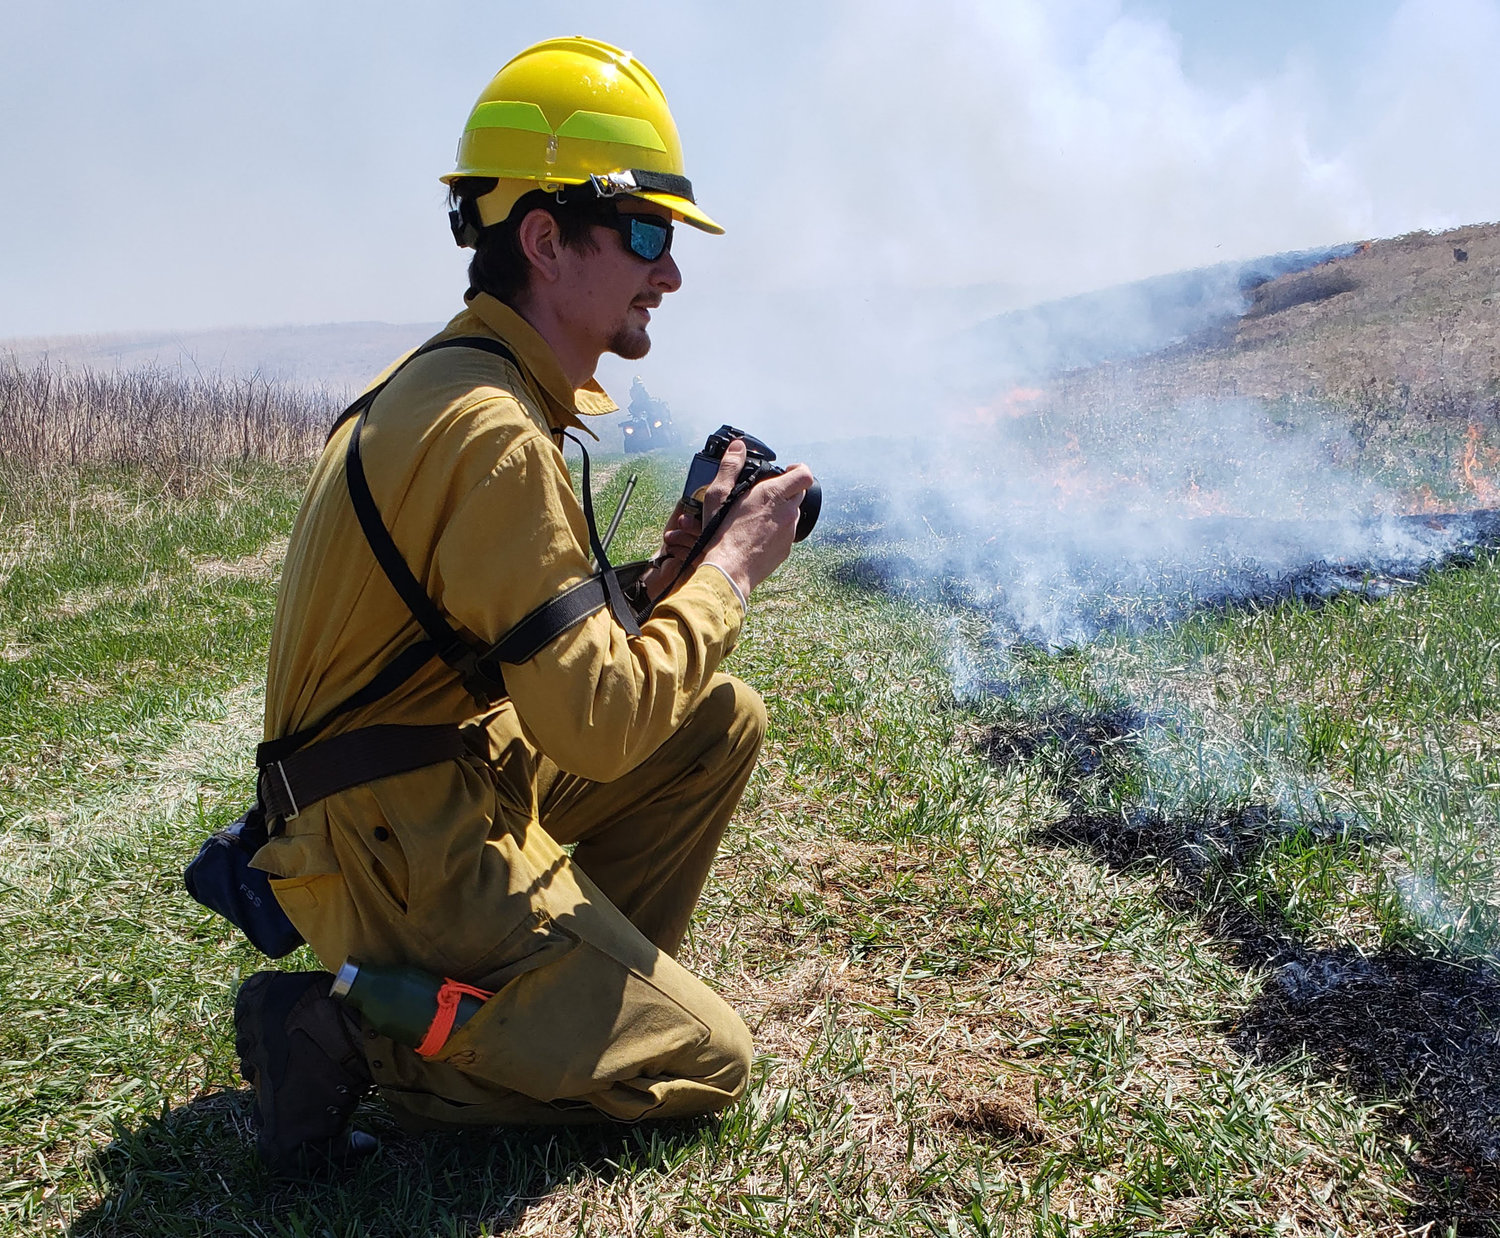 Man in fireproof outfit taking photographs at a prairie burn